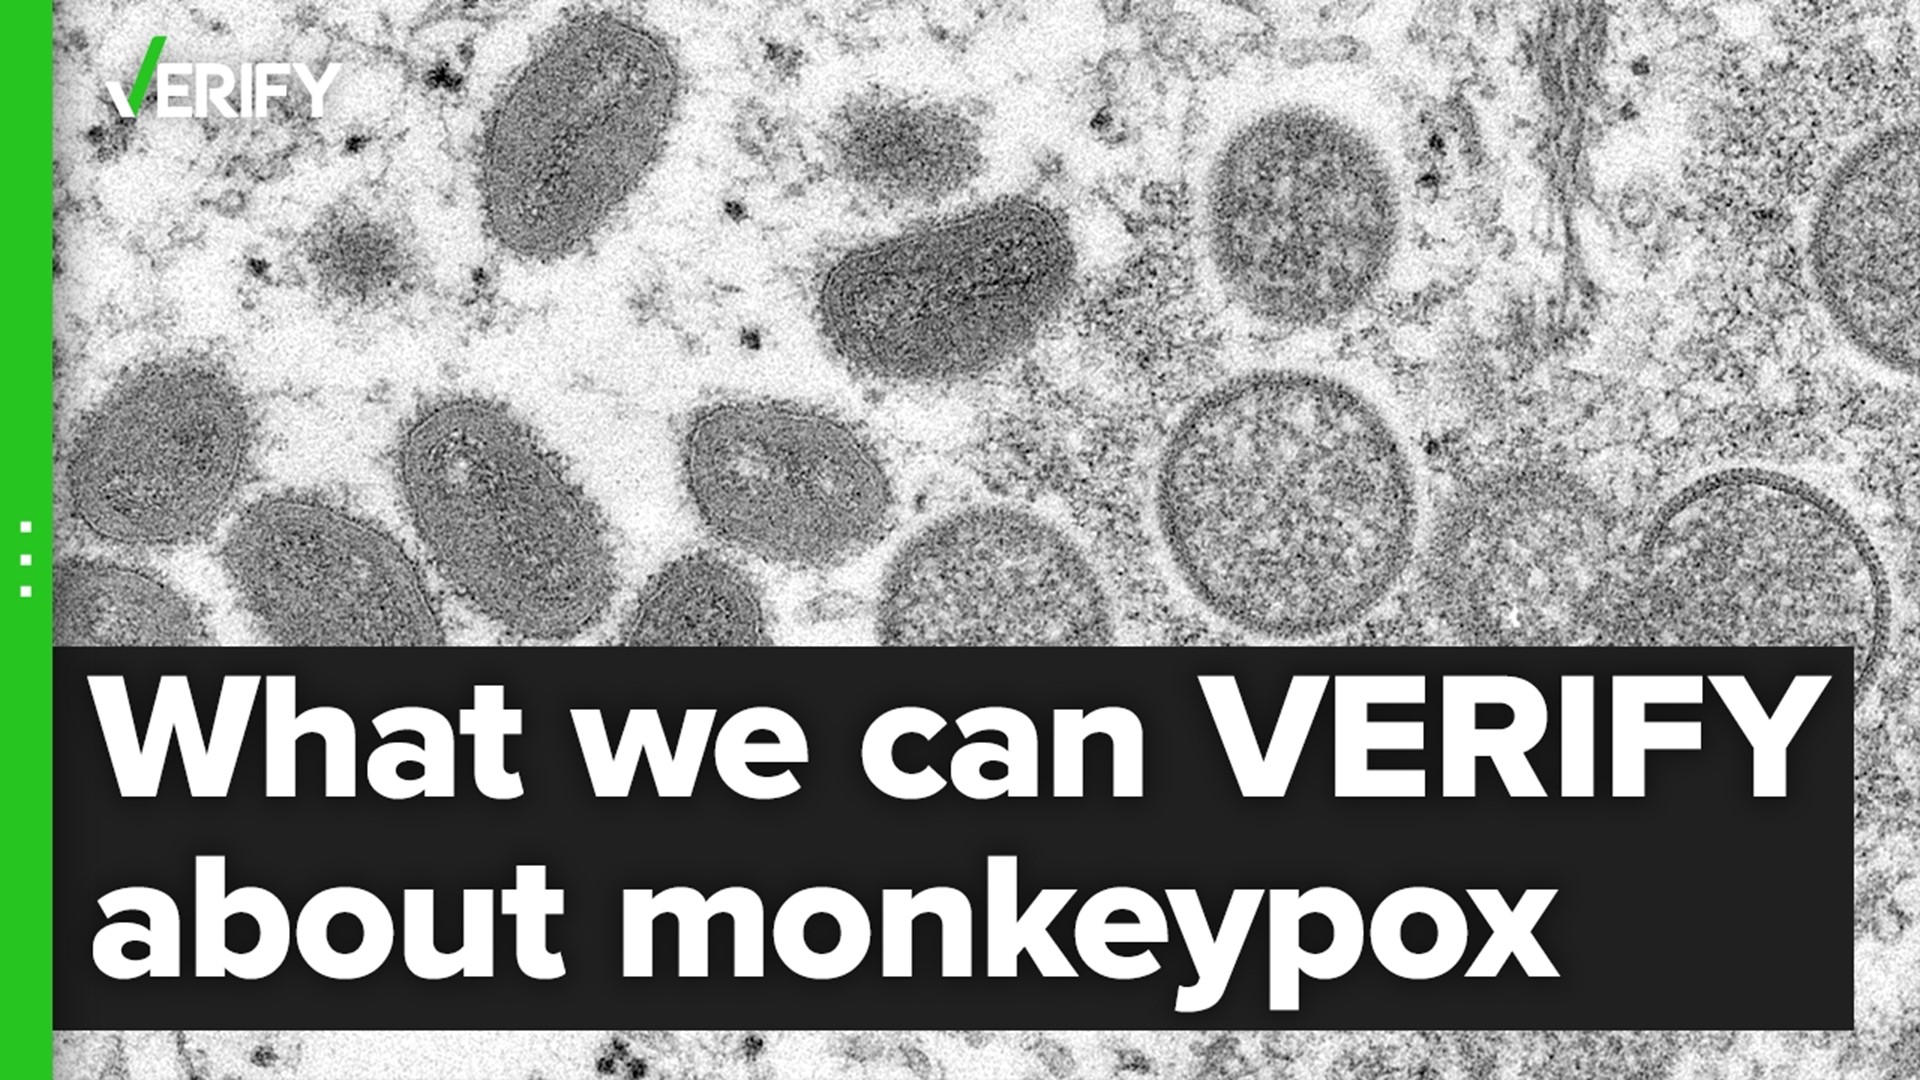 The VERIFY team looked into common questions regarding monkeypox.